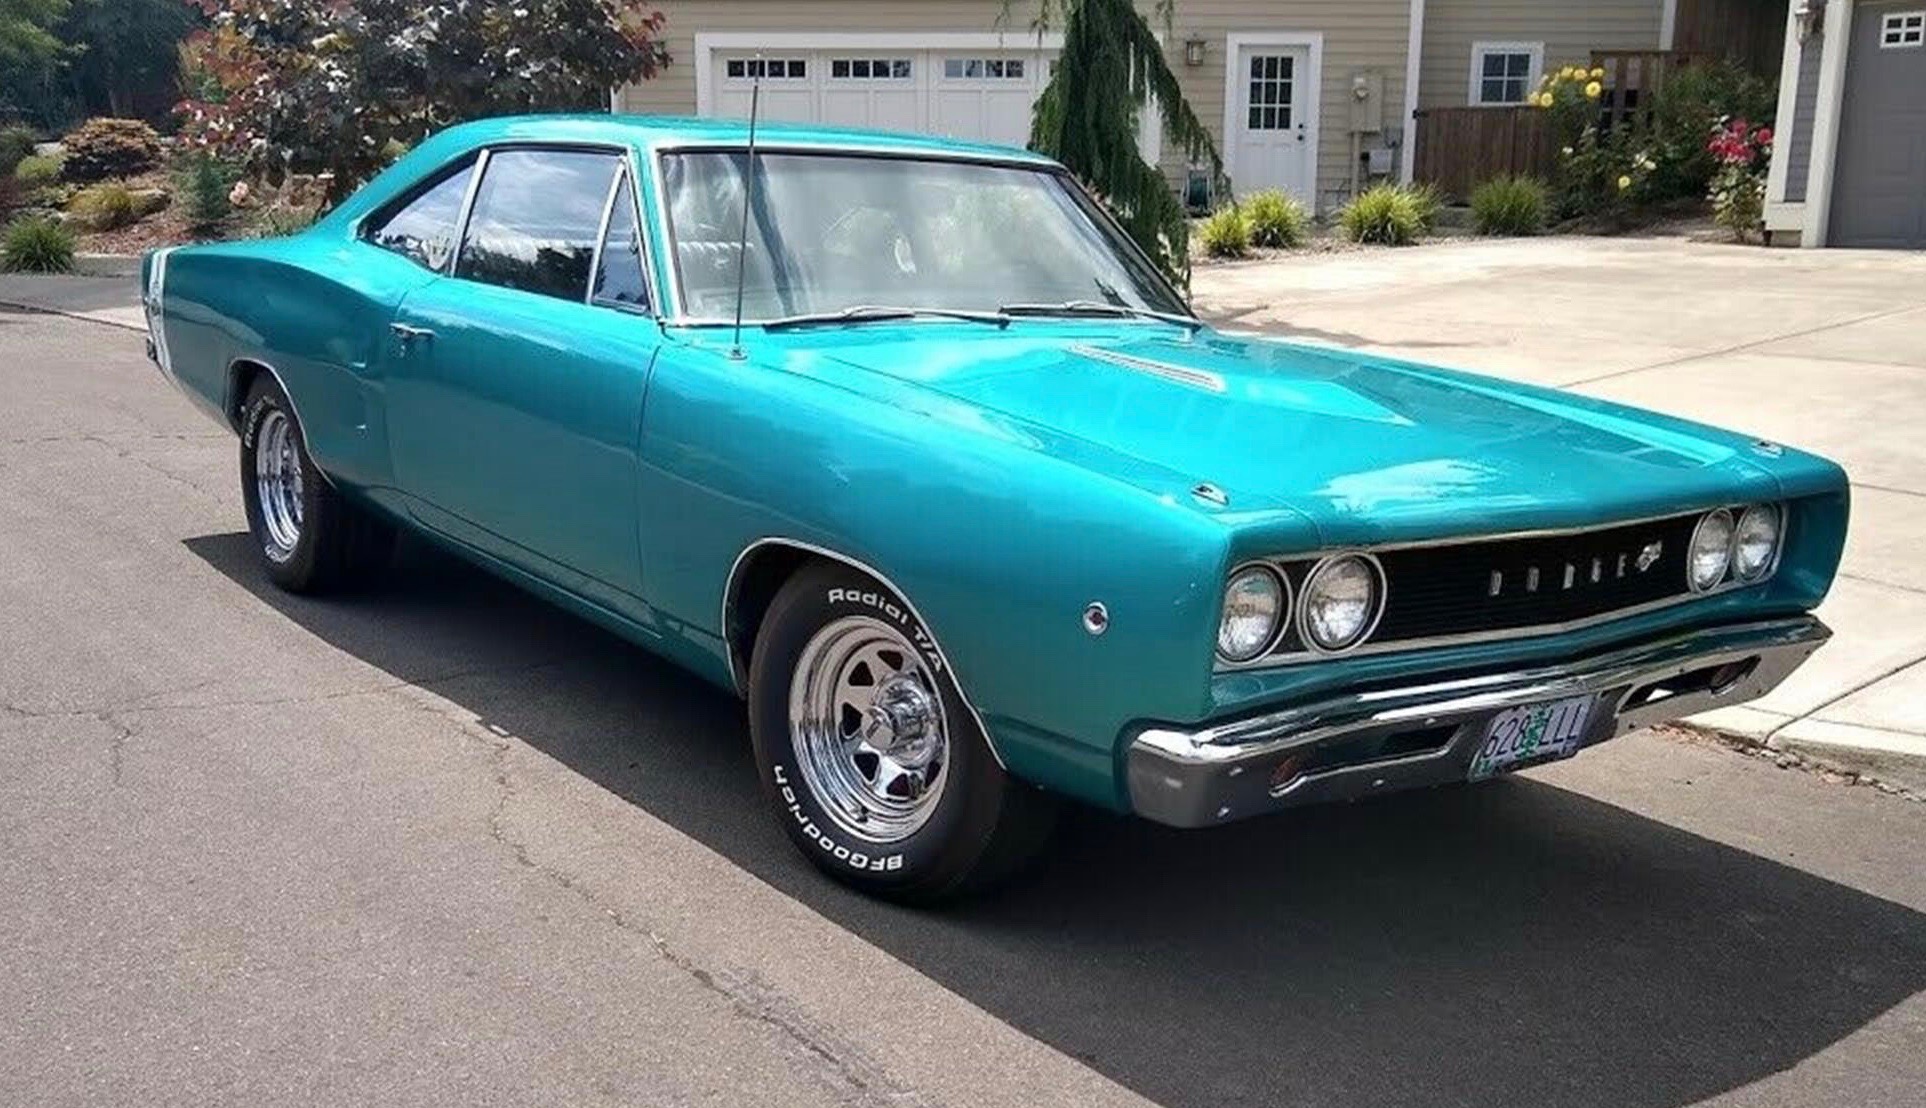 1968 Dodge Super Bee, This Bee stings with 440 V8 power, ClassicCars.com Journal